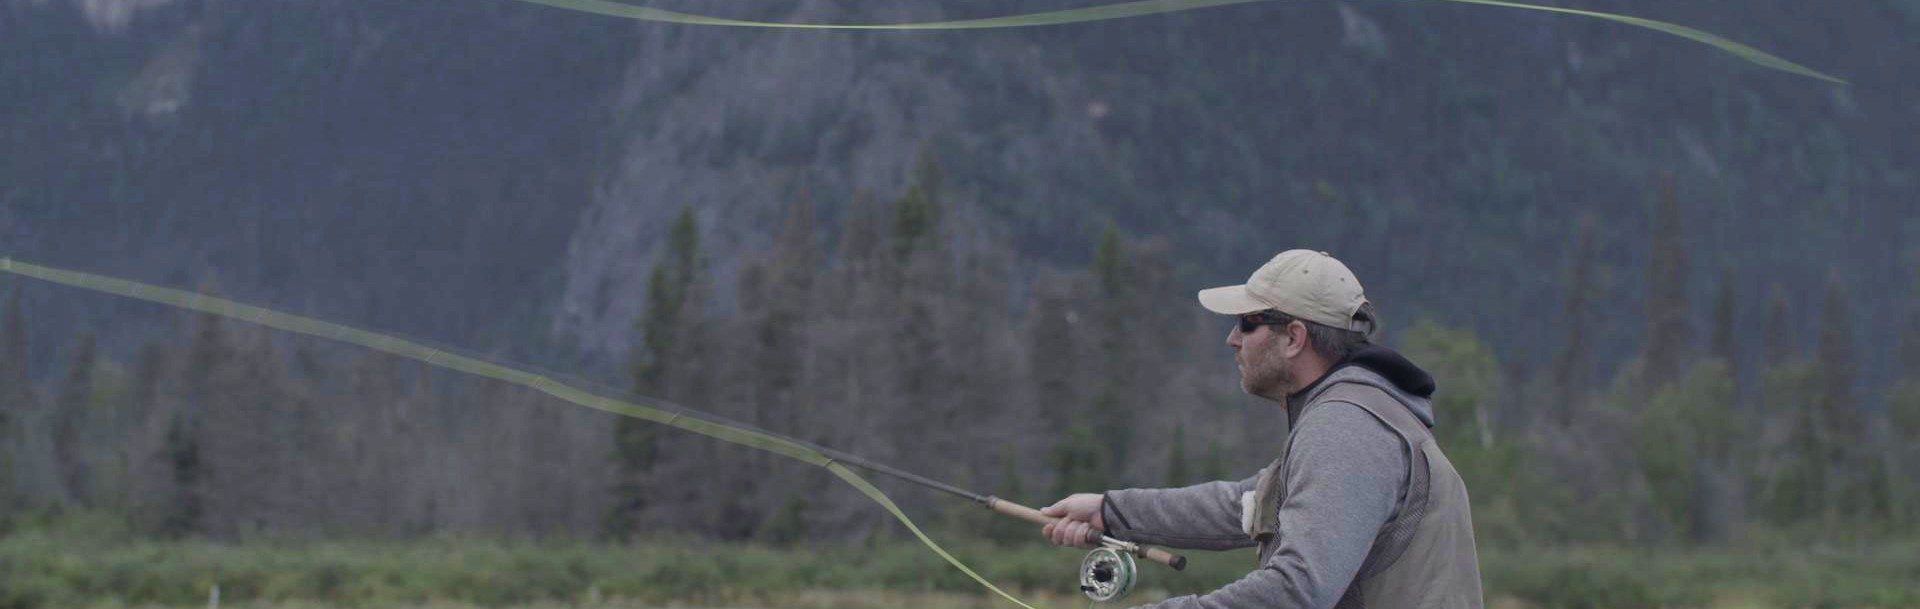 A man casting a fly fishing rod